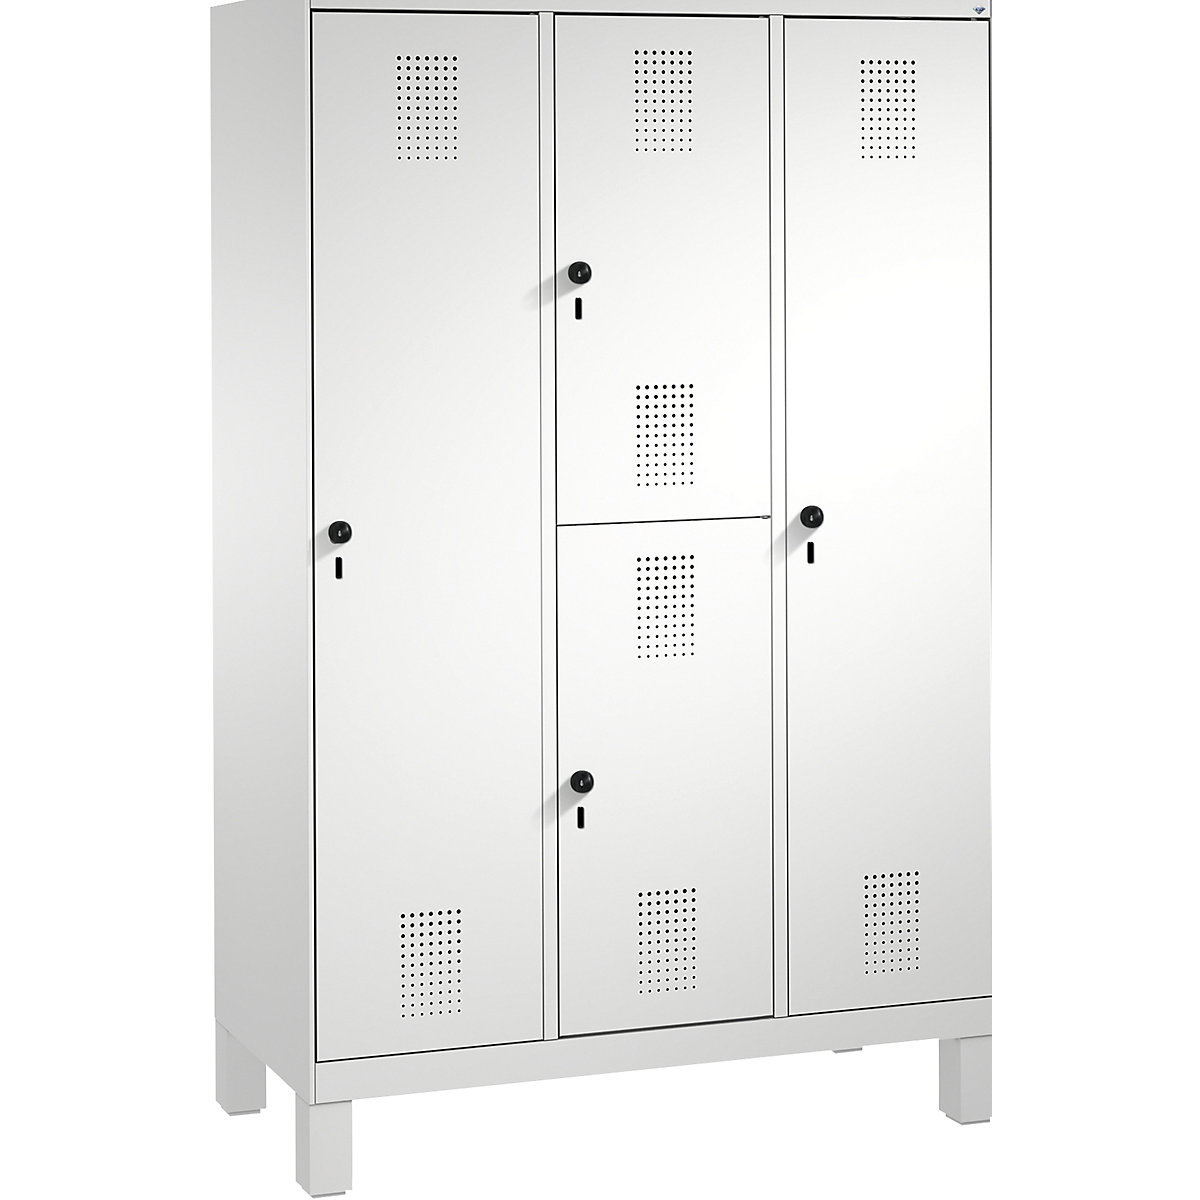 EVOLO combination cupboard, single and double tier – C+P, 3 compartments, 4 doors, compartment width 400 mm, with feet, light grey